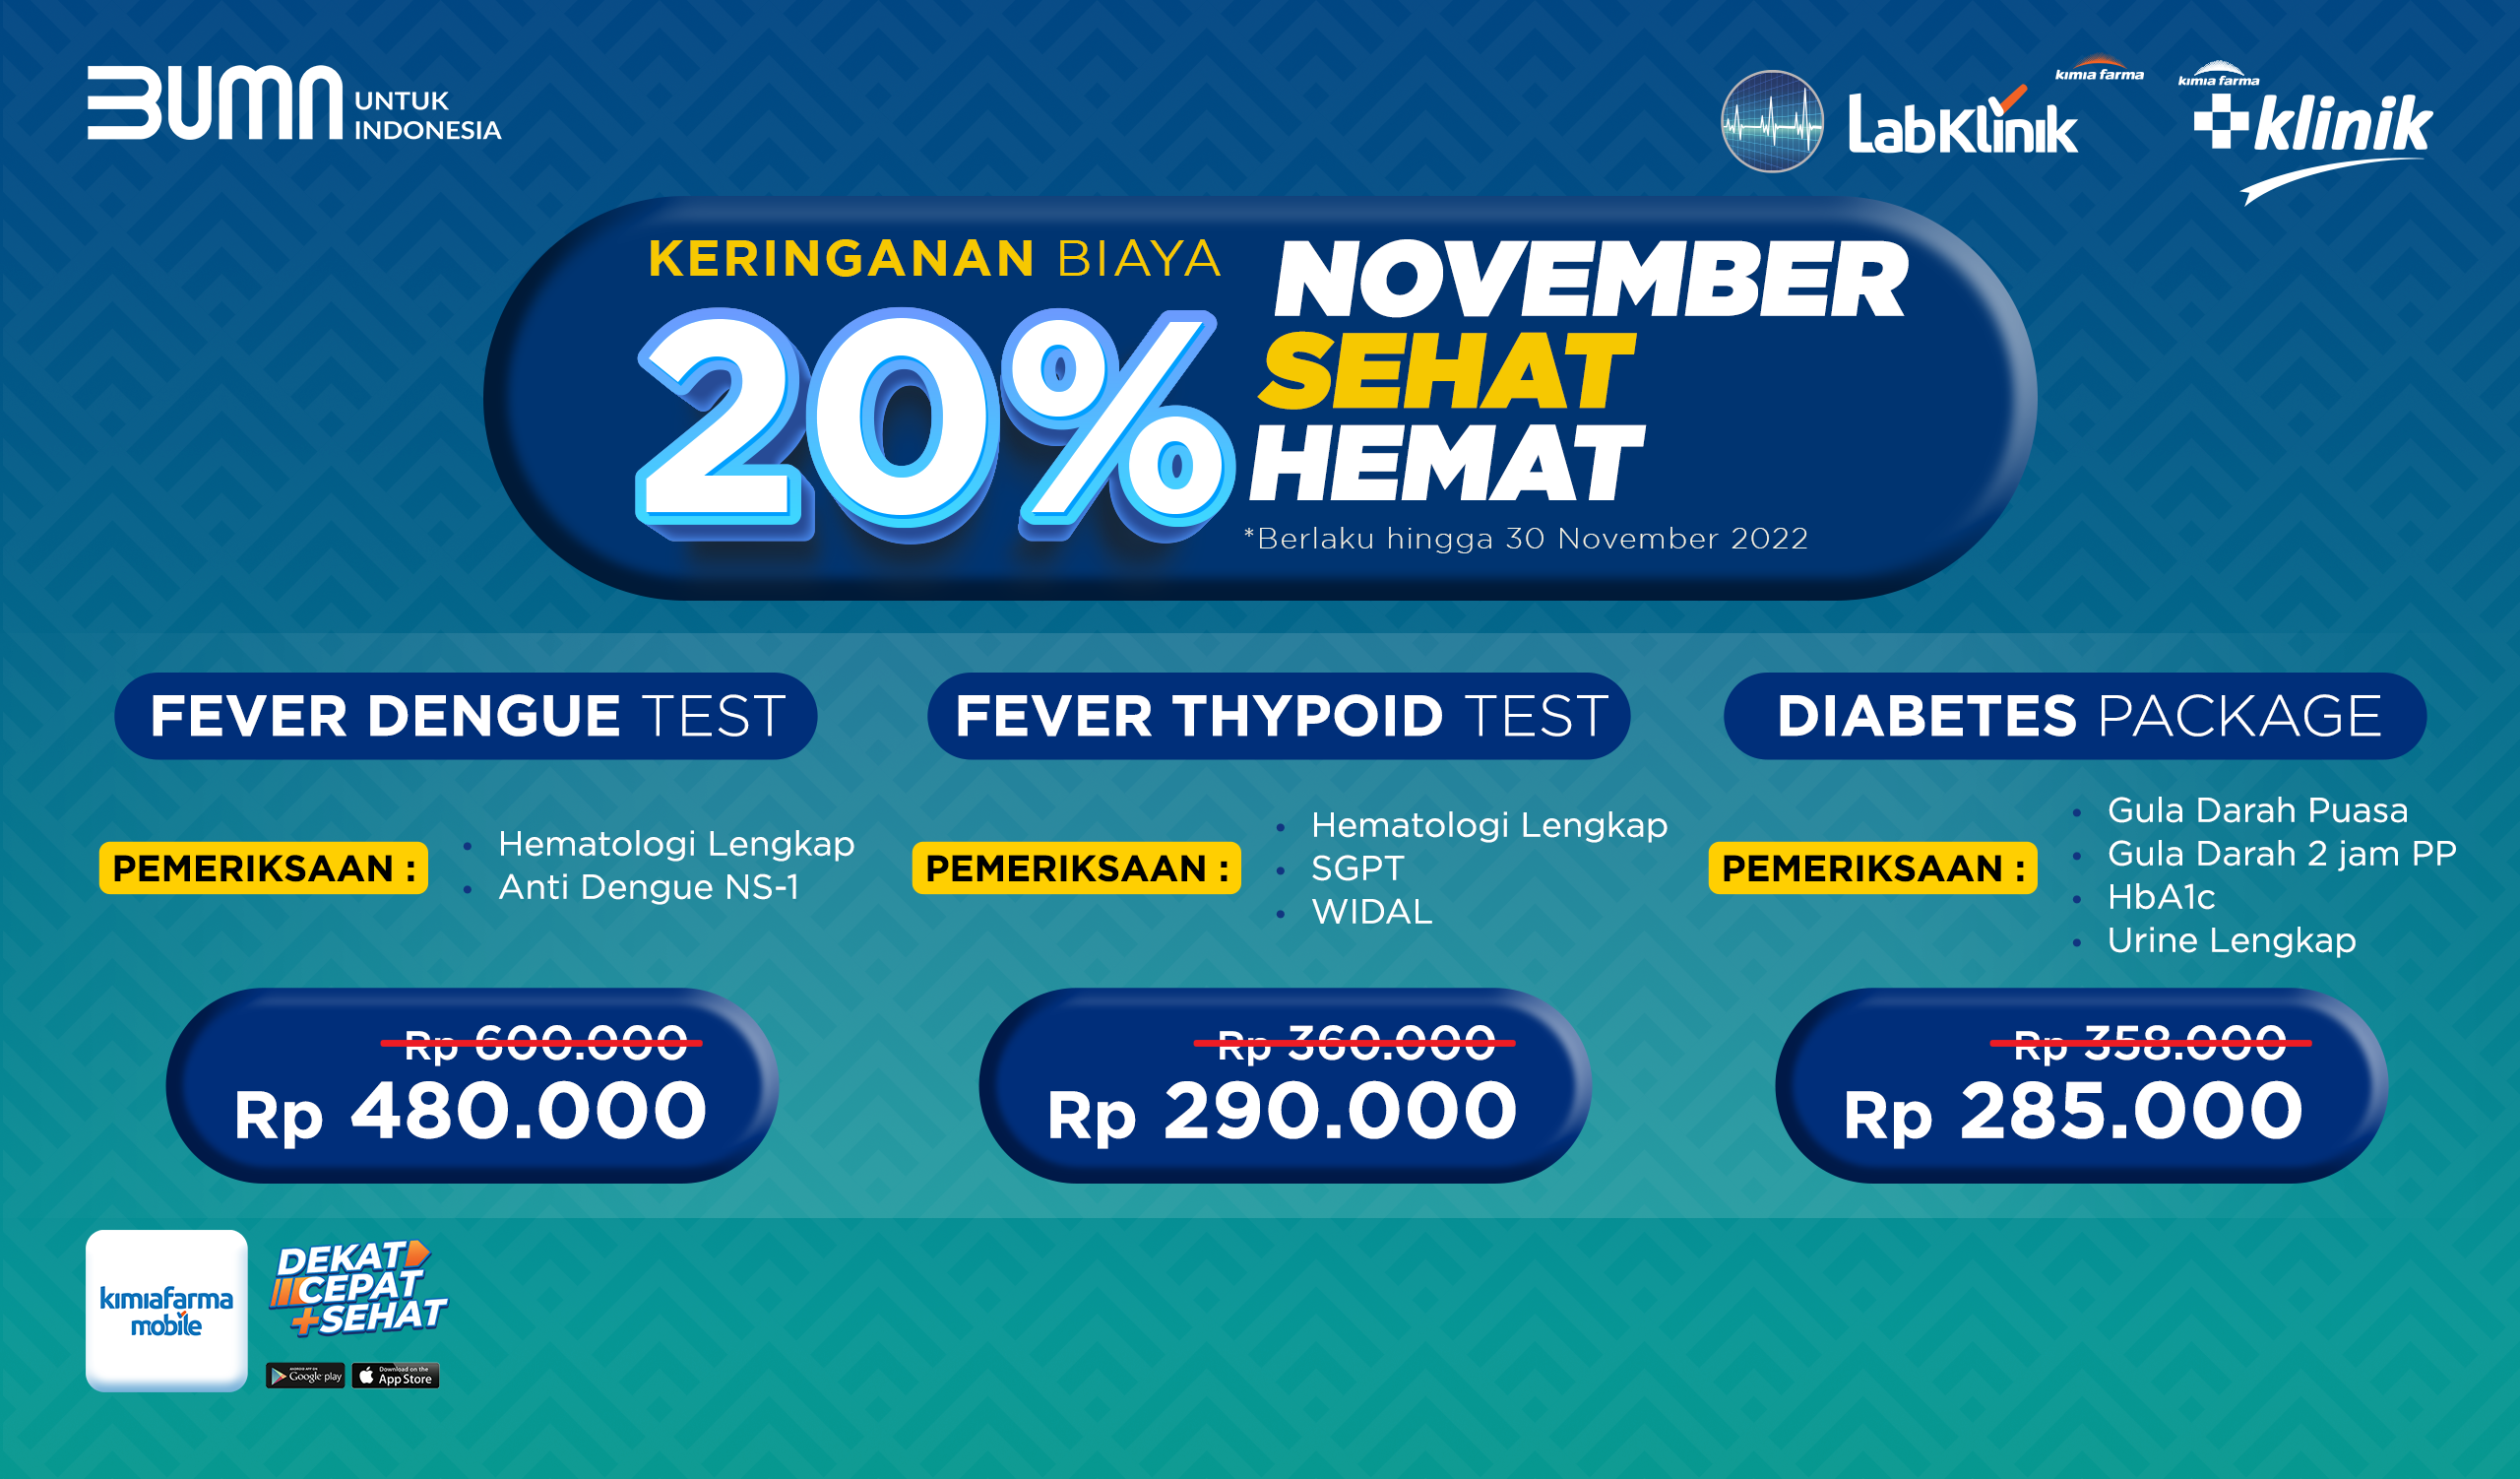 You are currently viewing Hemat 20% Fever Dangue Test, Fever Thypoid Test, Diabetes Package di Kimia Farma Mobile!